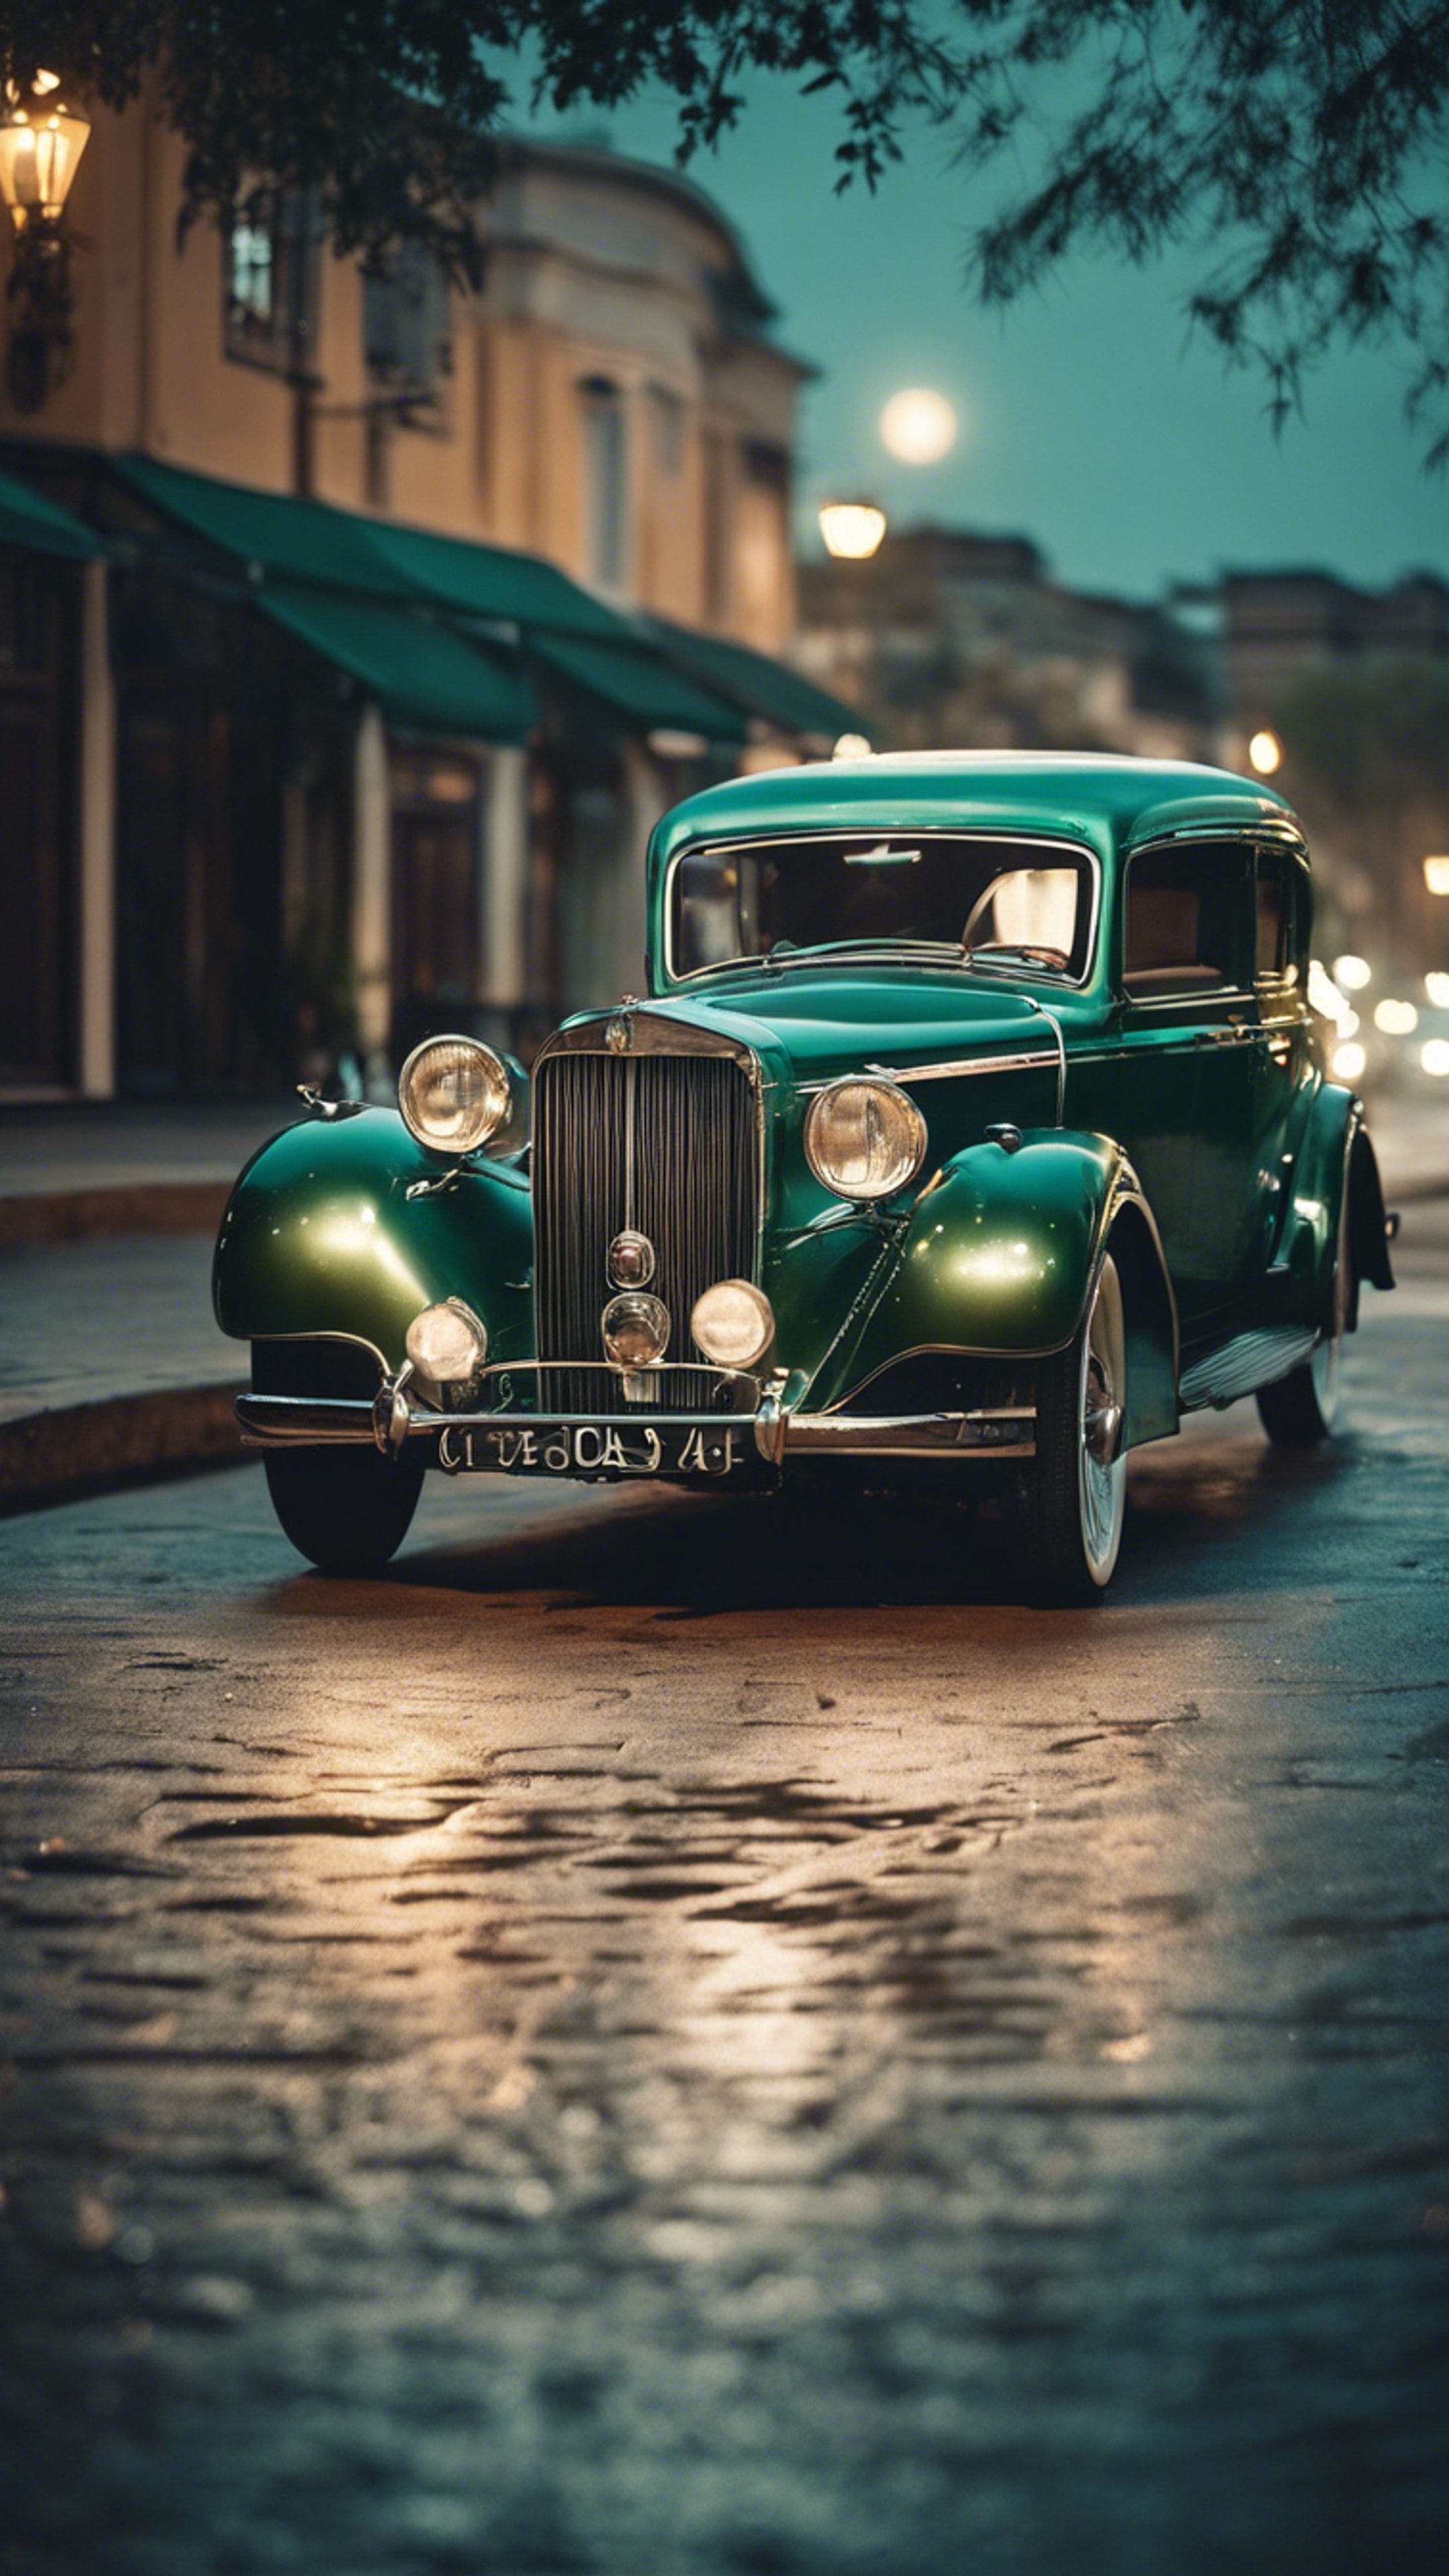 A luxurious antique car painted in cool dark green under the moonlight. Валлпапер[5cdba2e68b66456f8c5a]